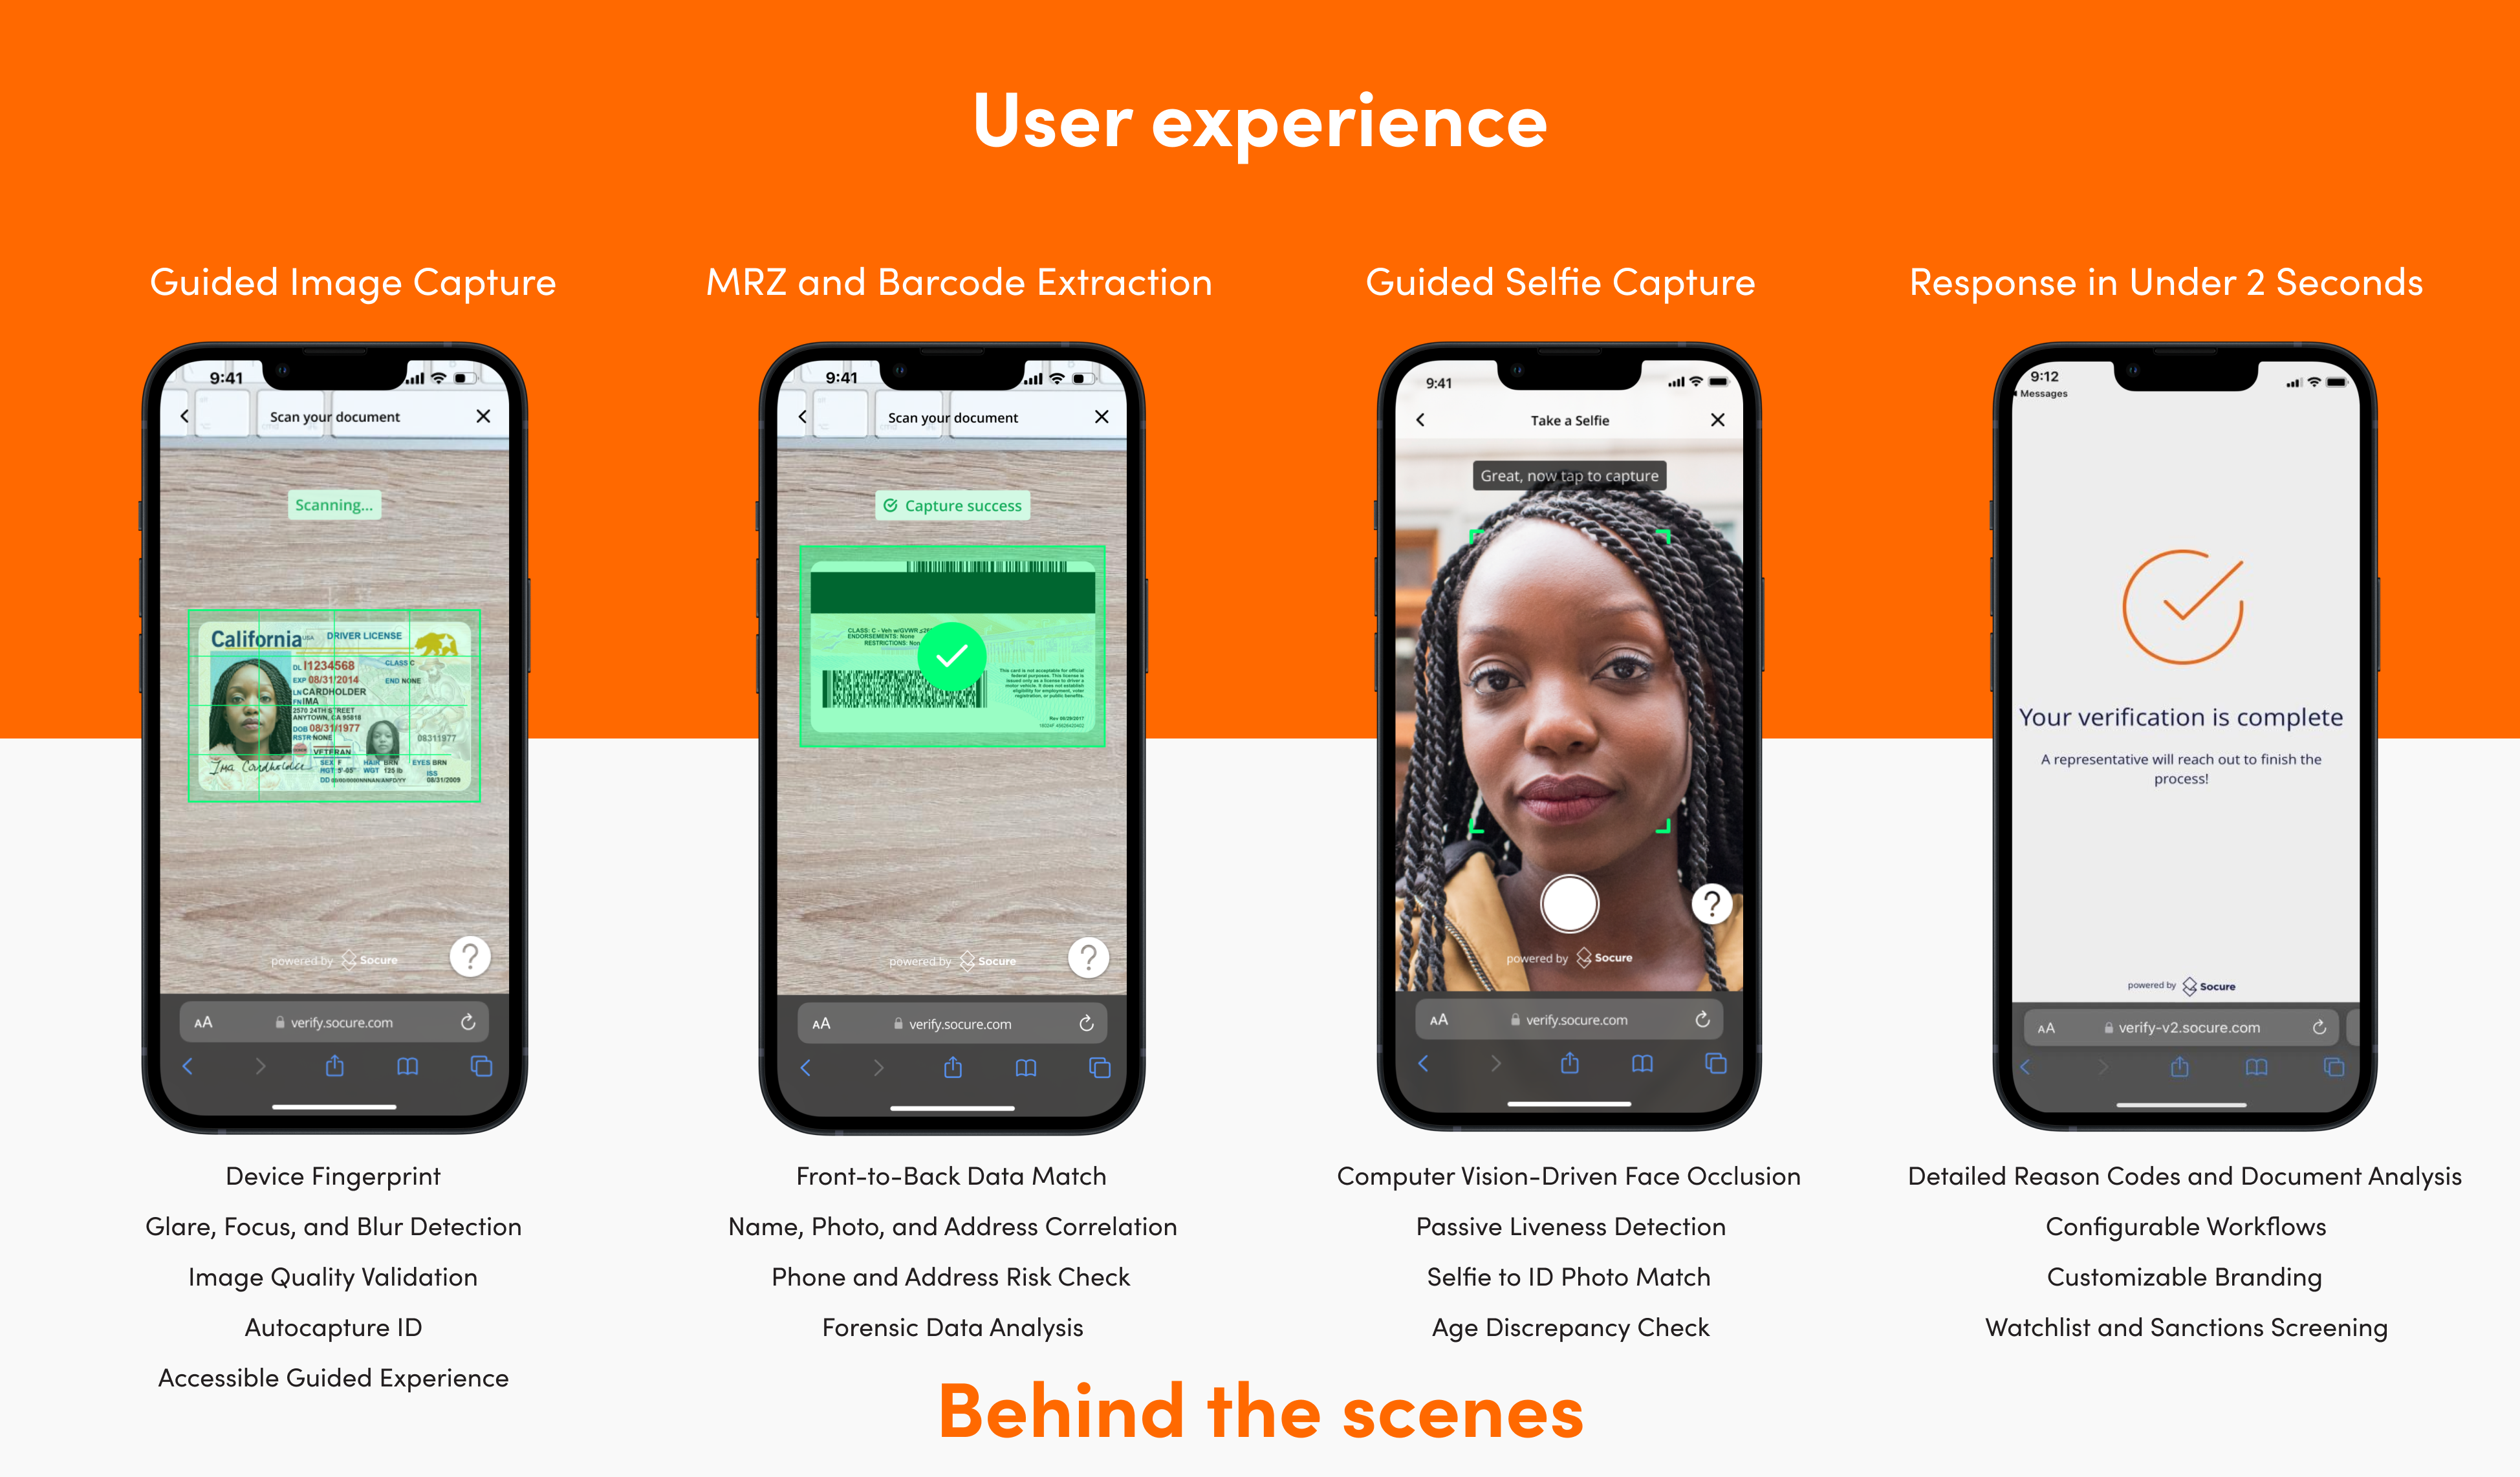 User experience & behind the scenes